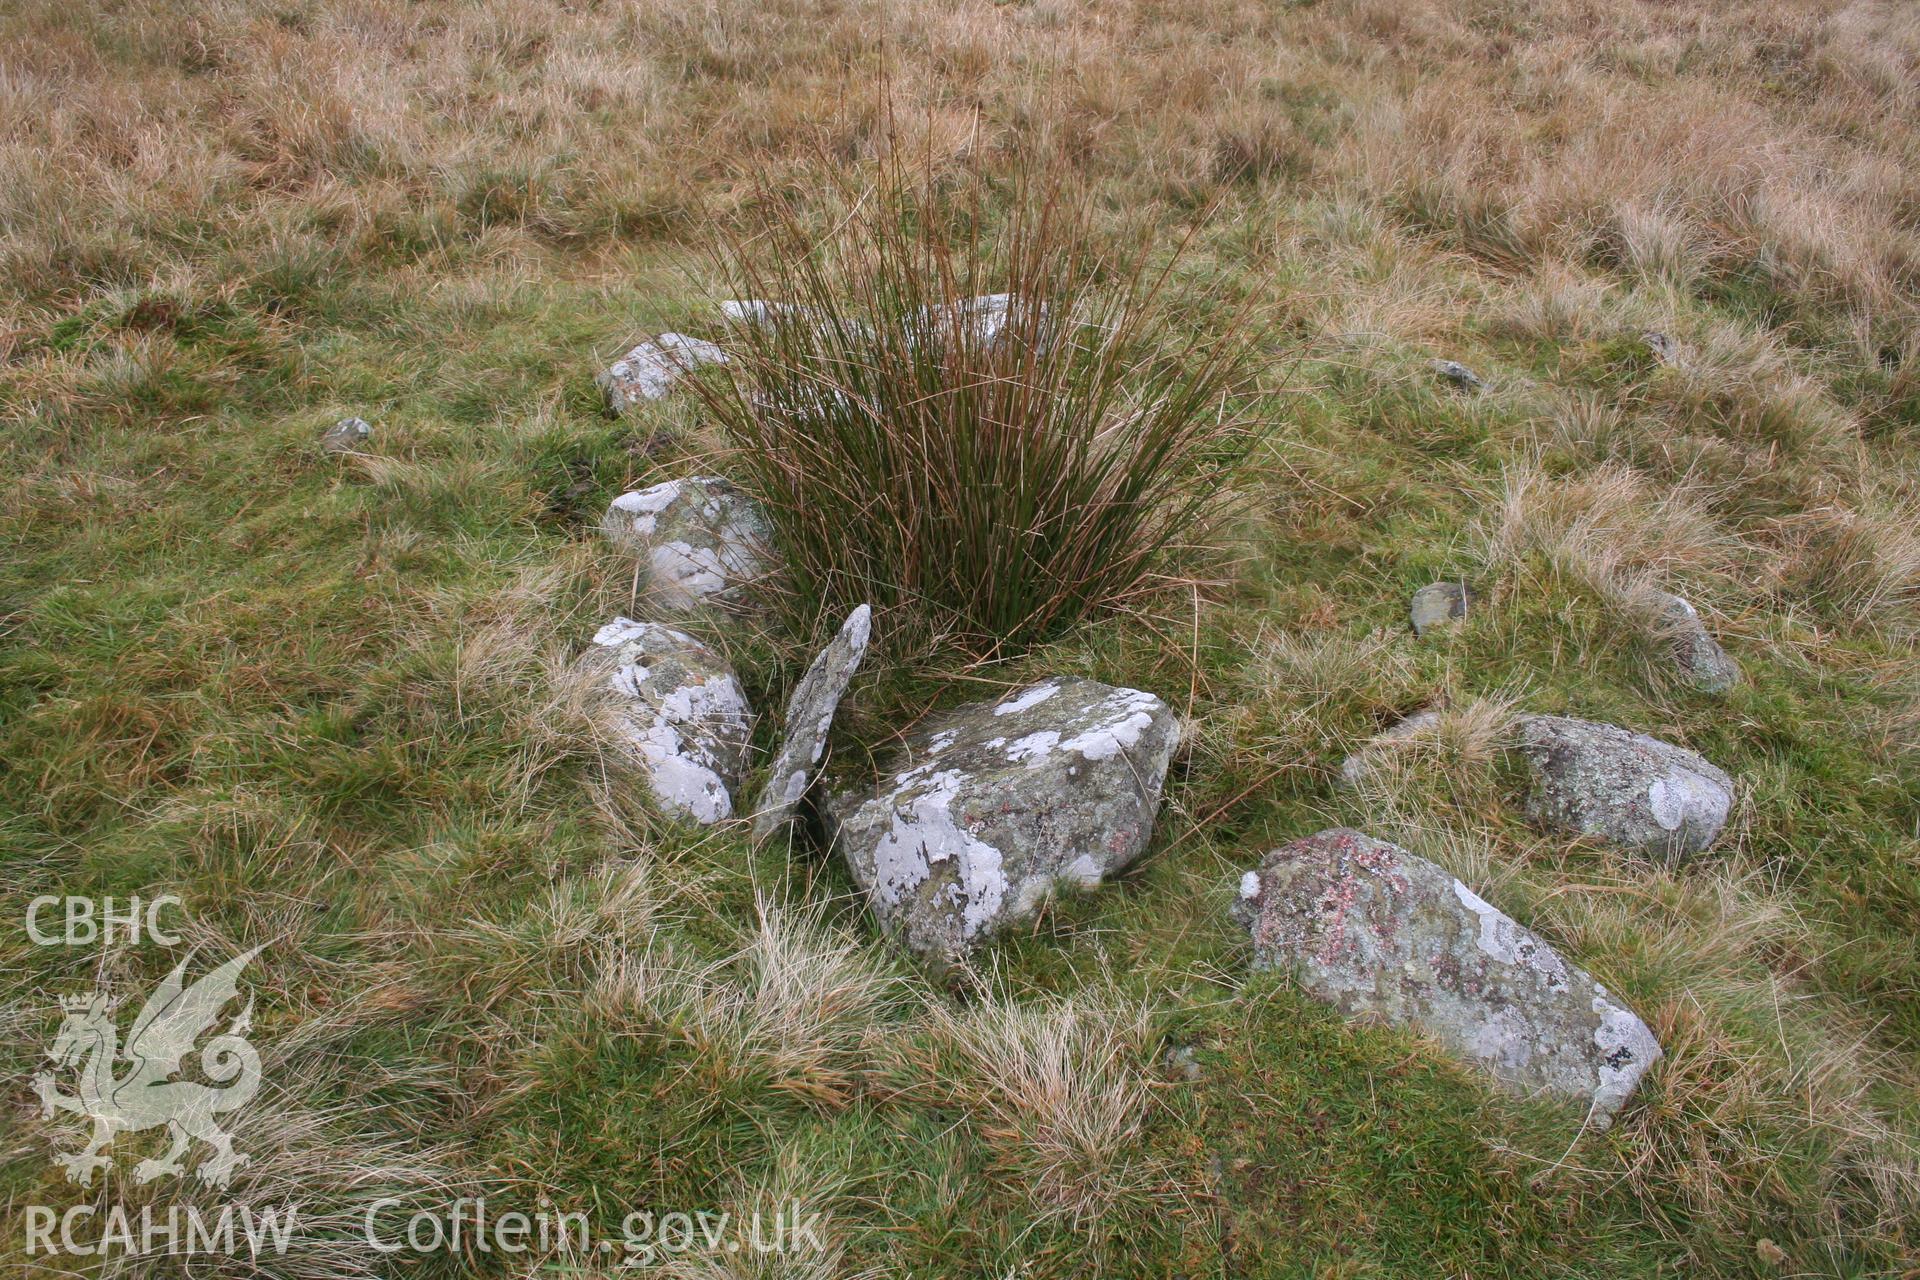 Close up of cairn showing central hollow.